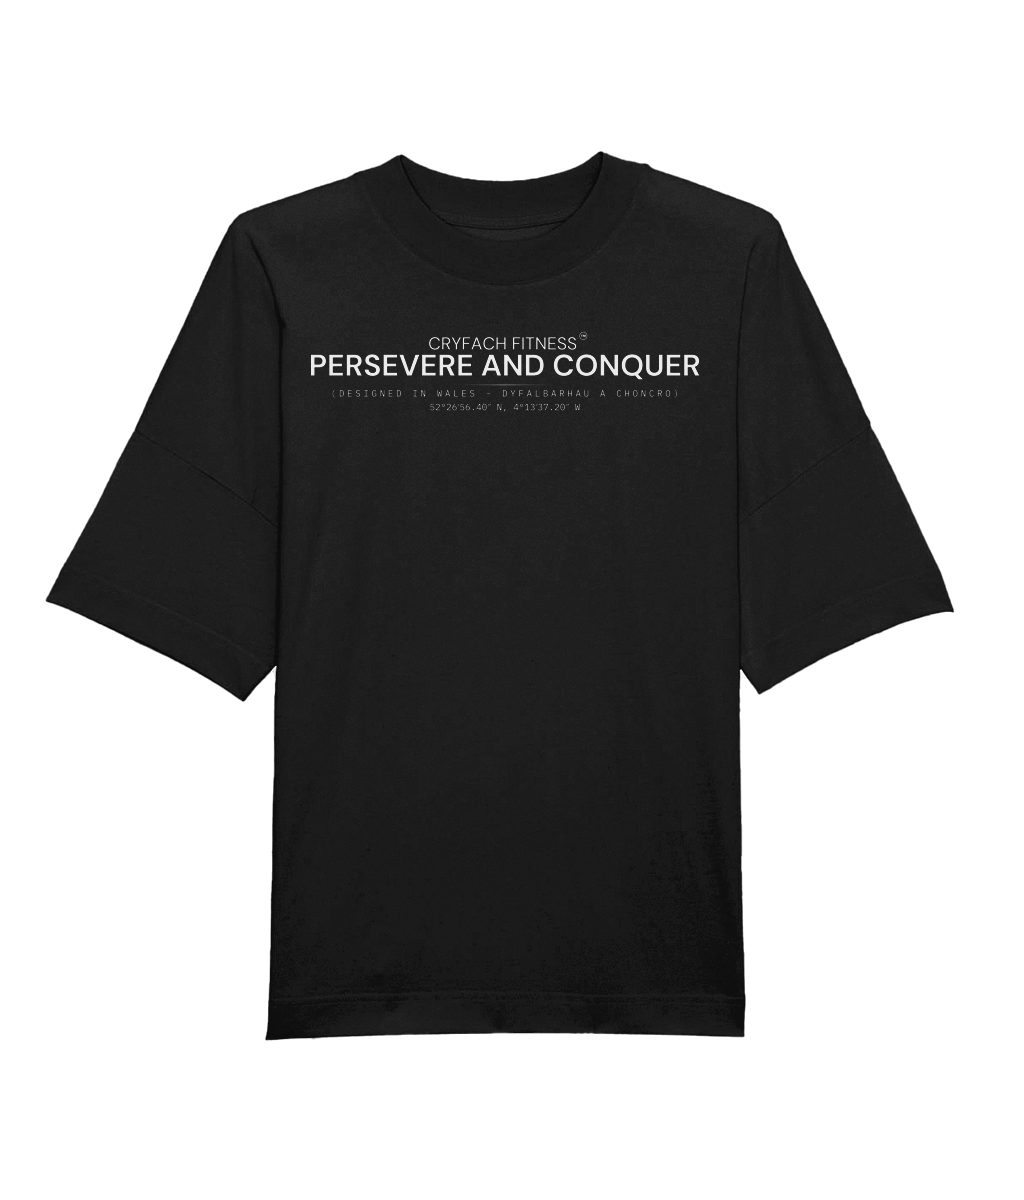 PERSEVERE AND CONQUER OVERSIZED T-SHIRT